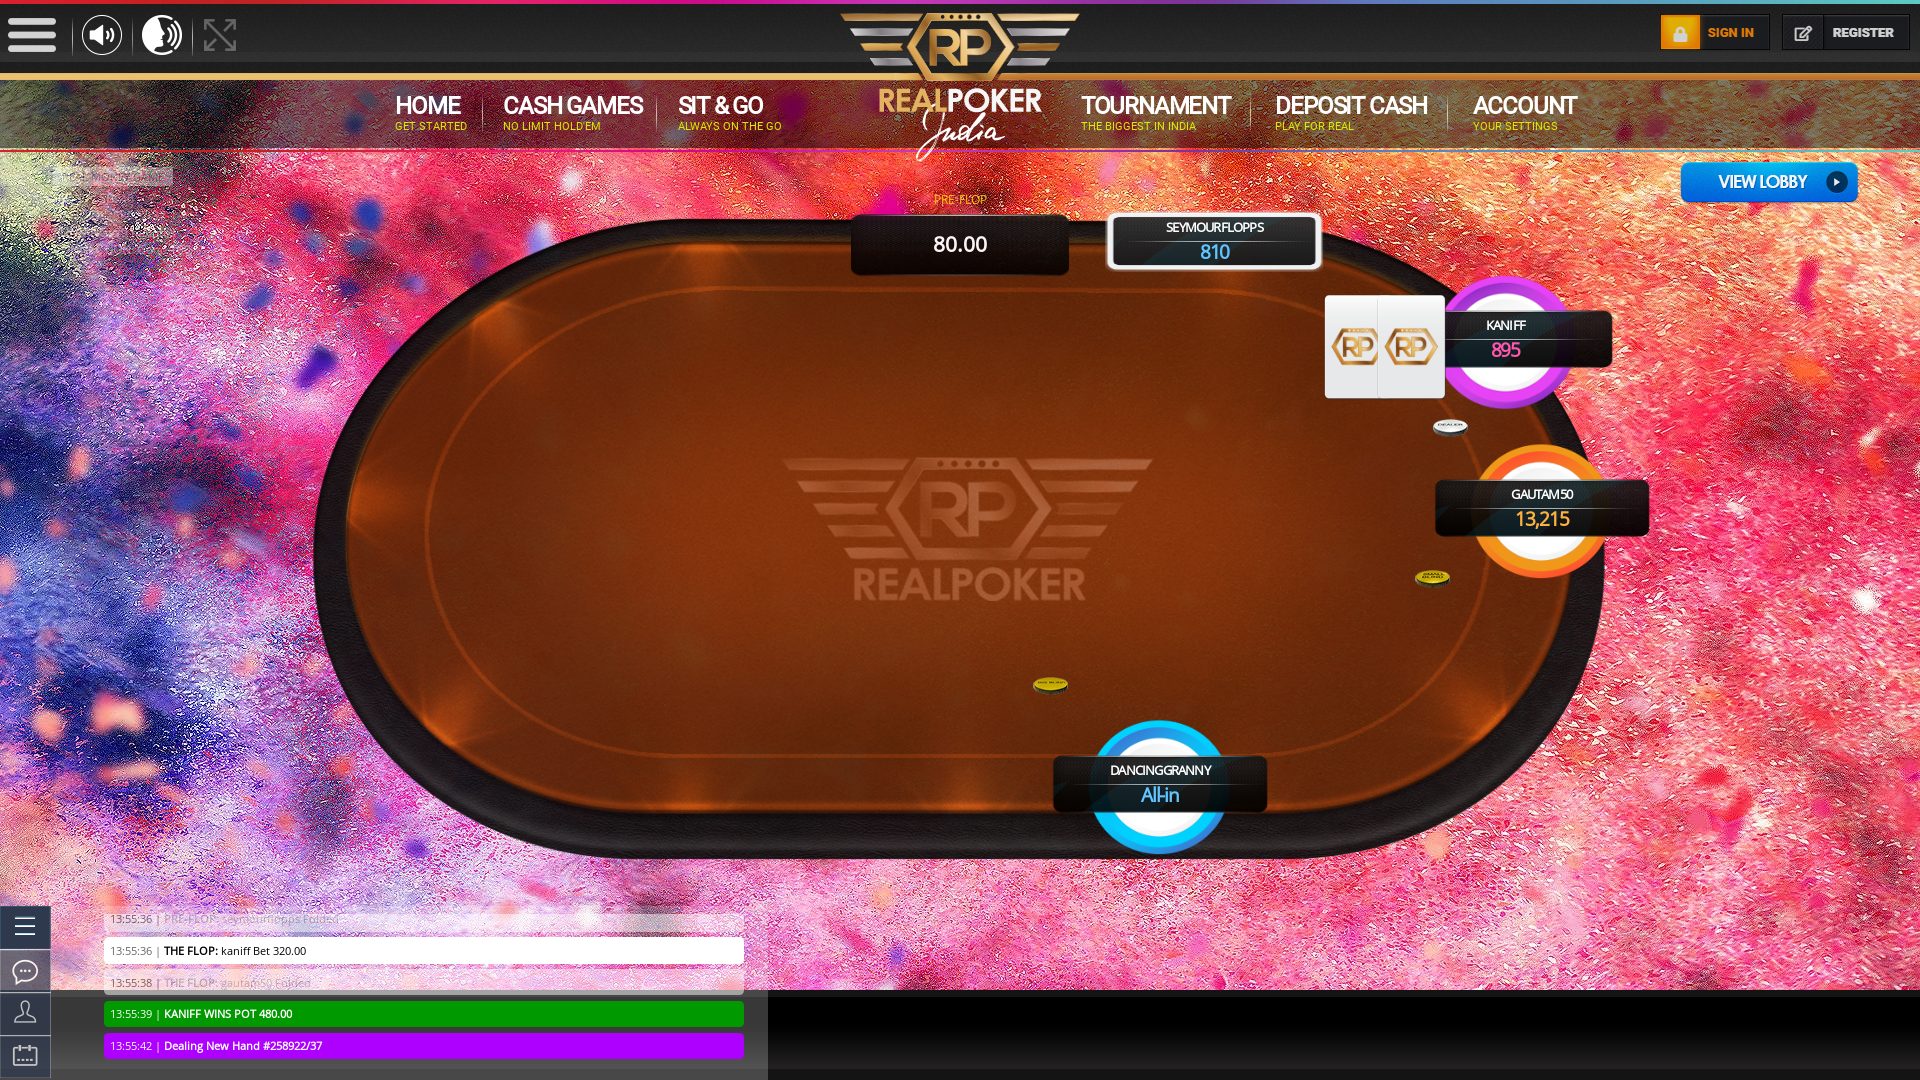 Online poker on a 10 player table in the 29th minute match up